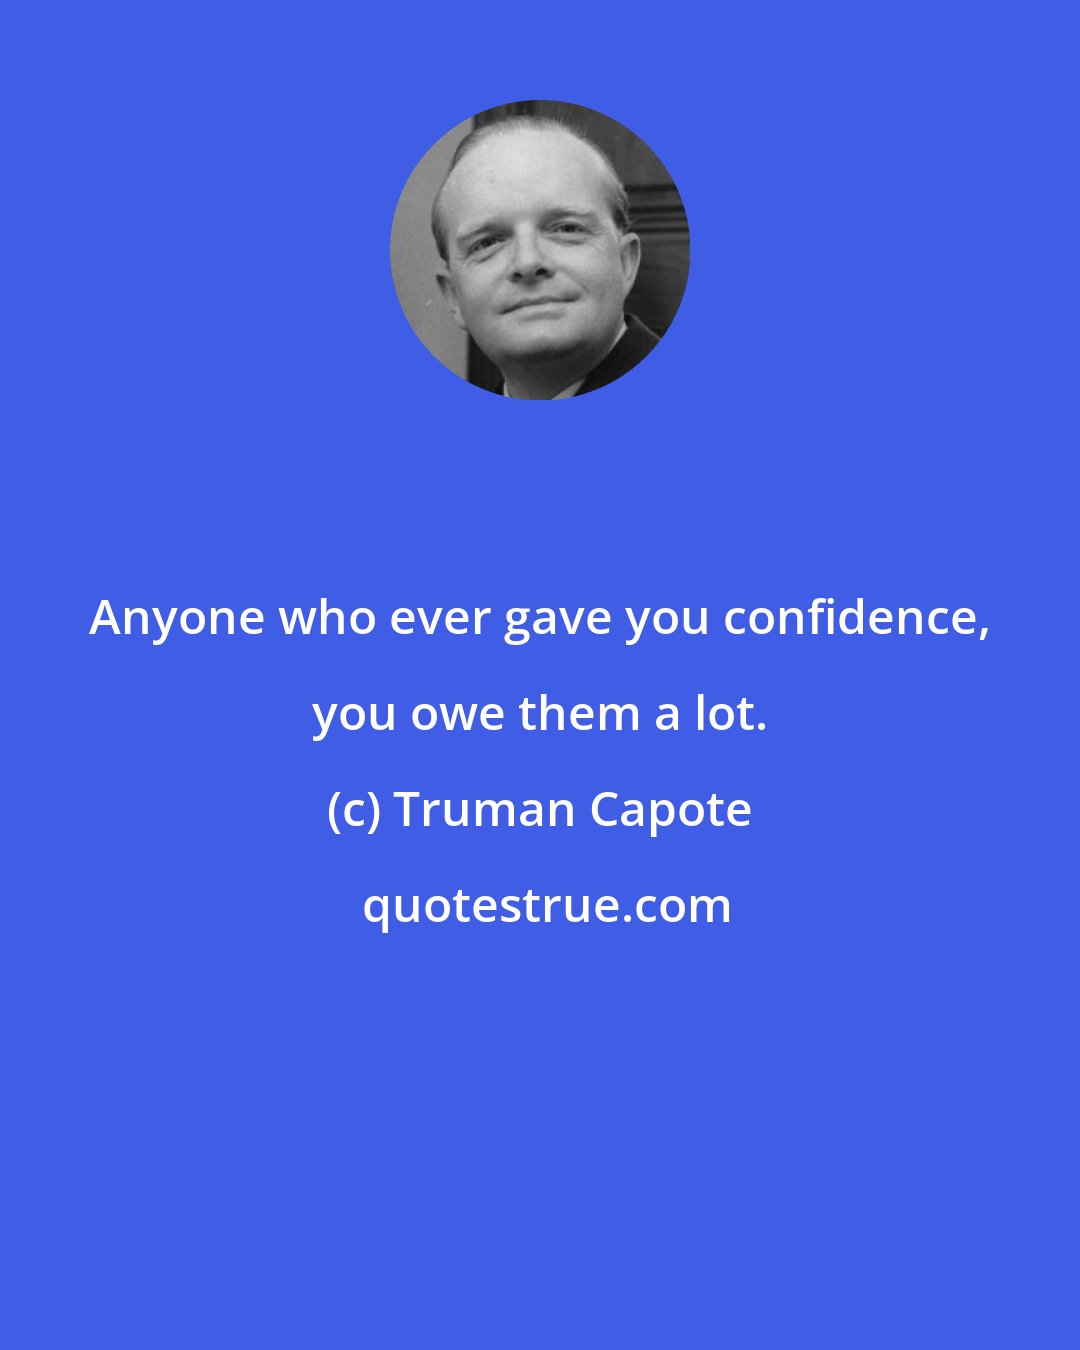 Truman Capote: Anyone who ever gave you confidence, you owe them a lot.